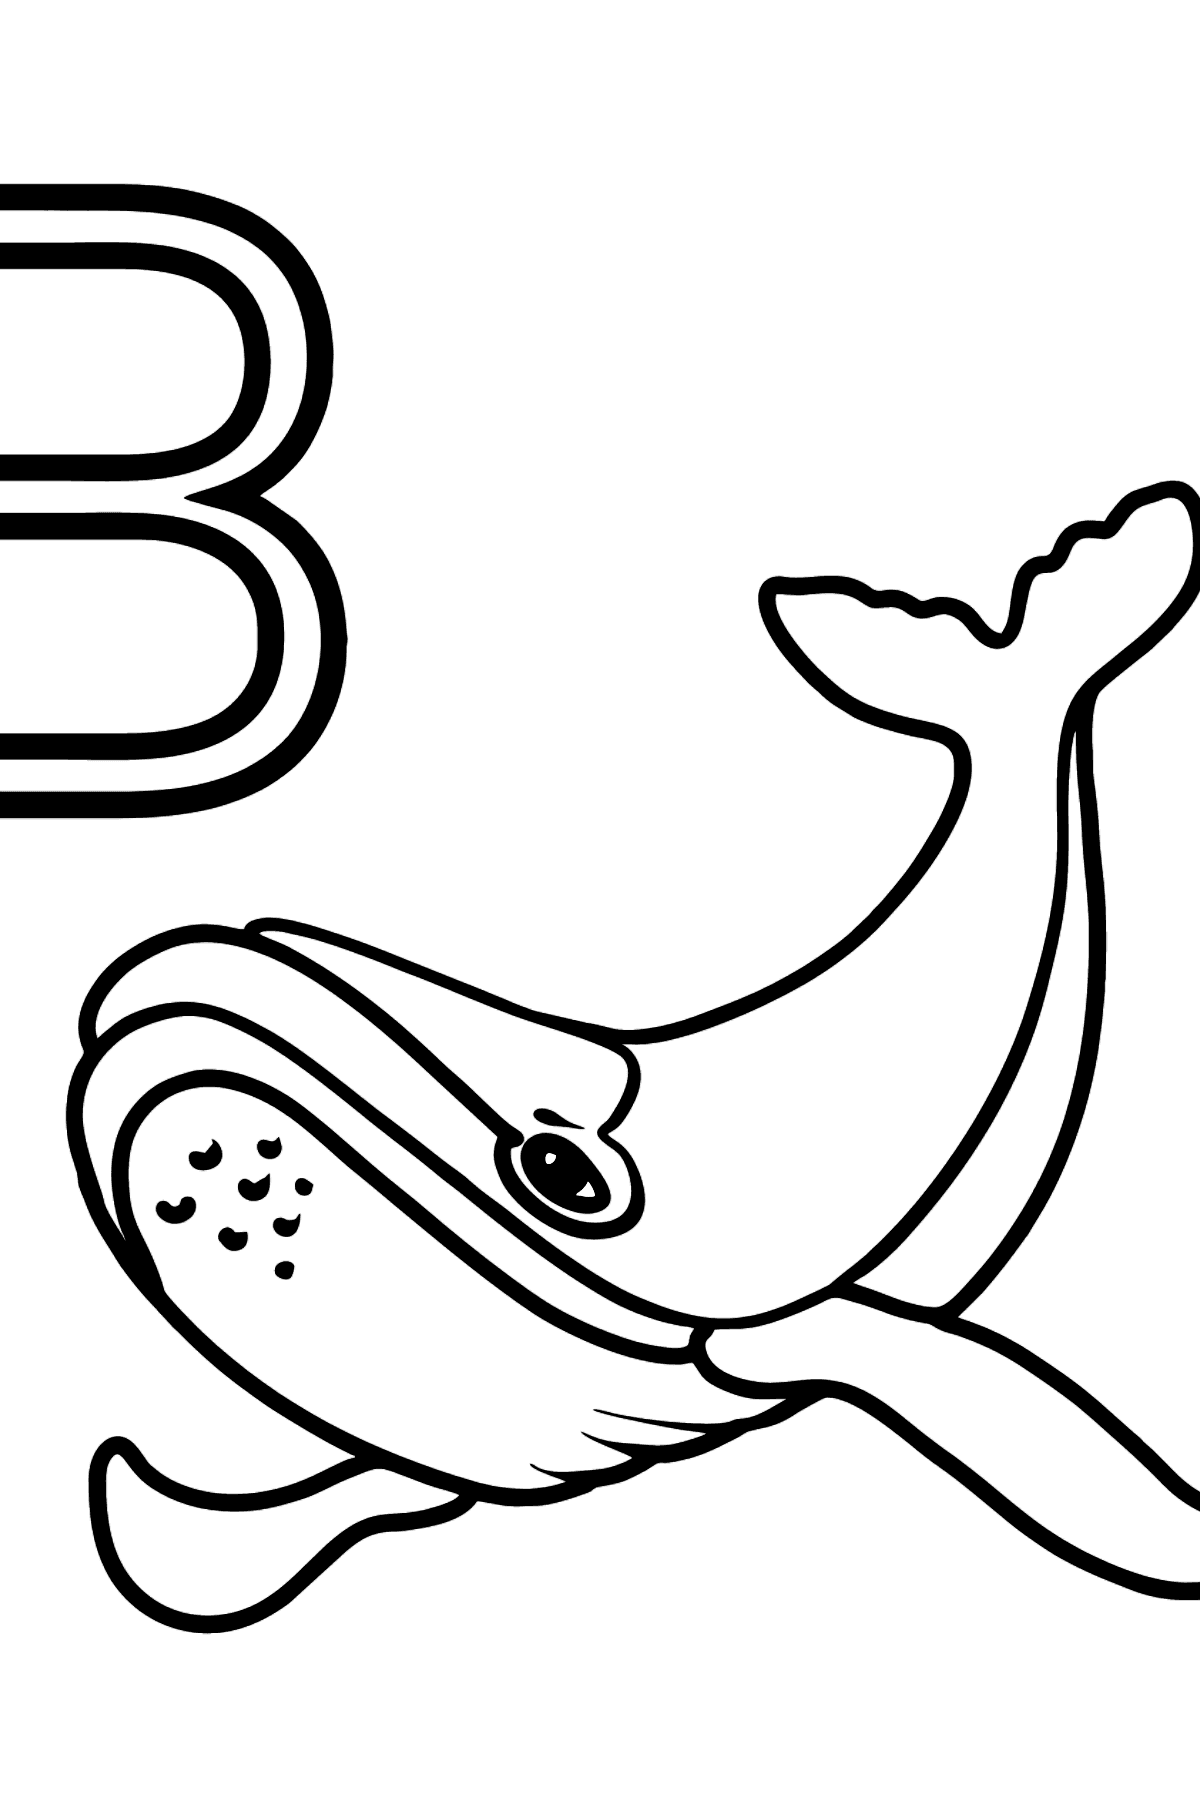 Portuguese Letter B coloring pages - BALEIA - Coloring Pages for Kids